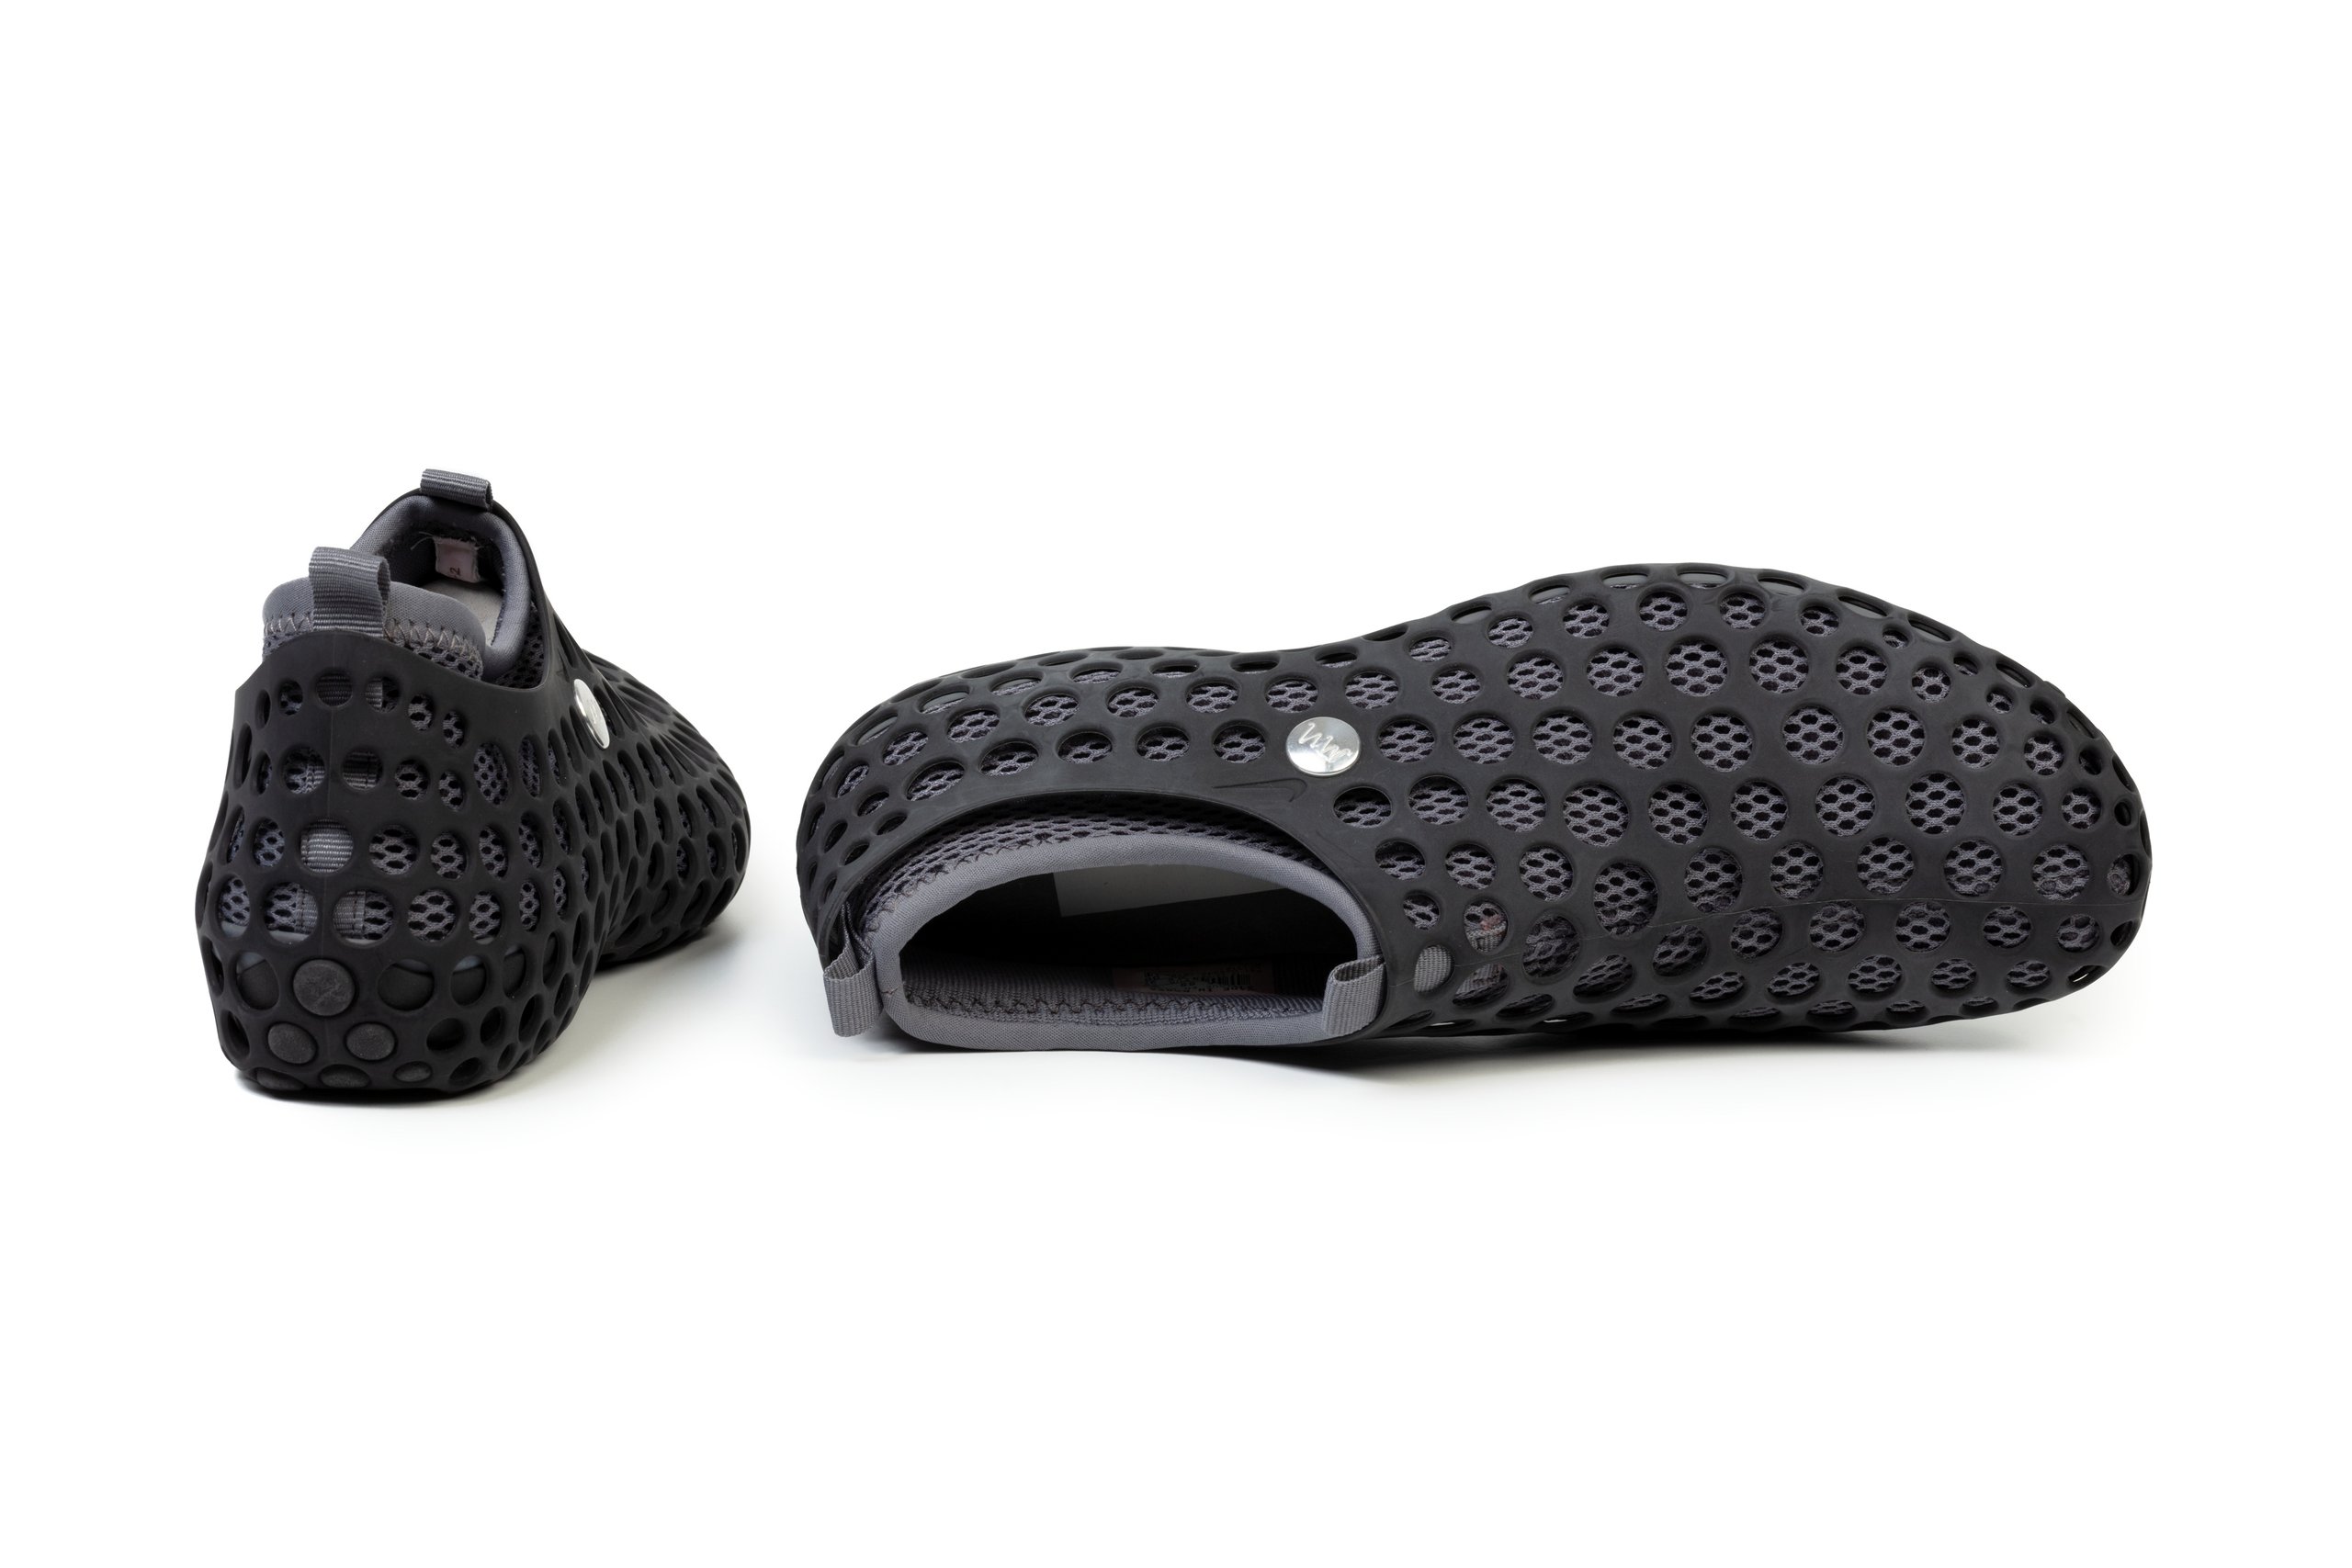 Pair of 'Zvezdochka' shoes designed by Marc Newson for Nike